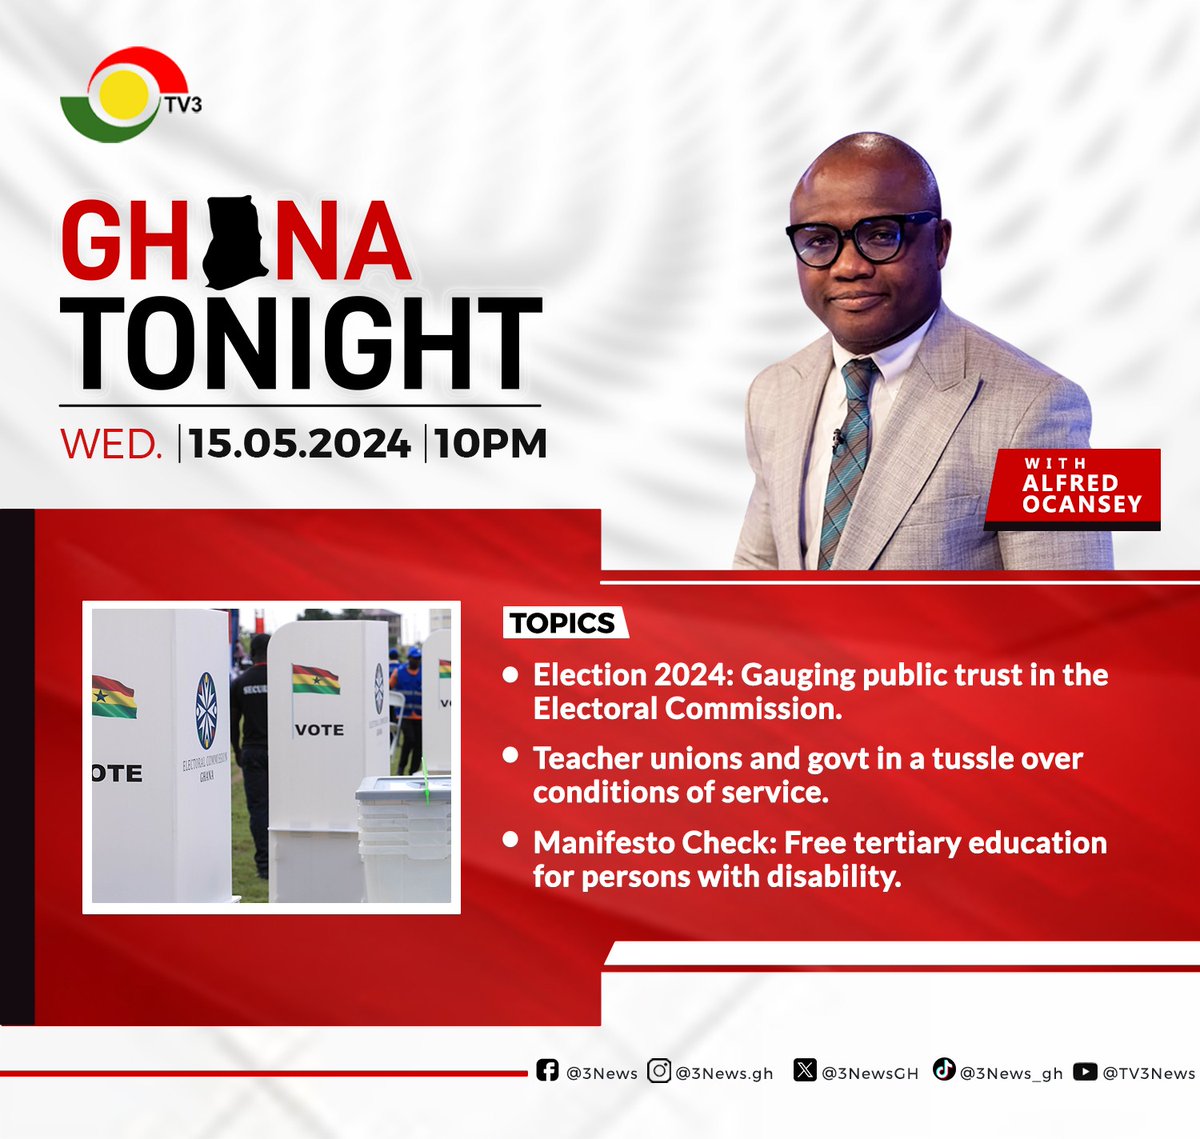 We're live on #GhanaTonight with @alfred_3fm at 10PM #3NewsGH